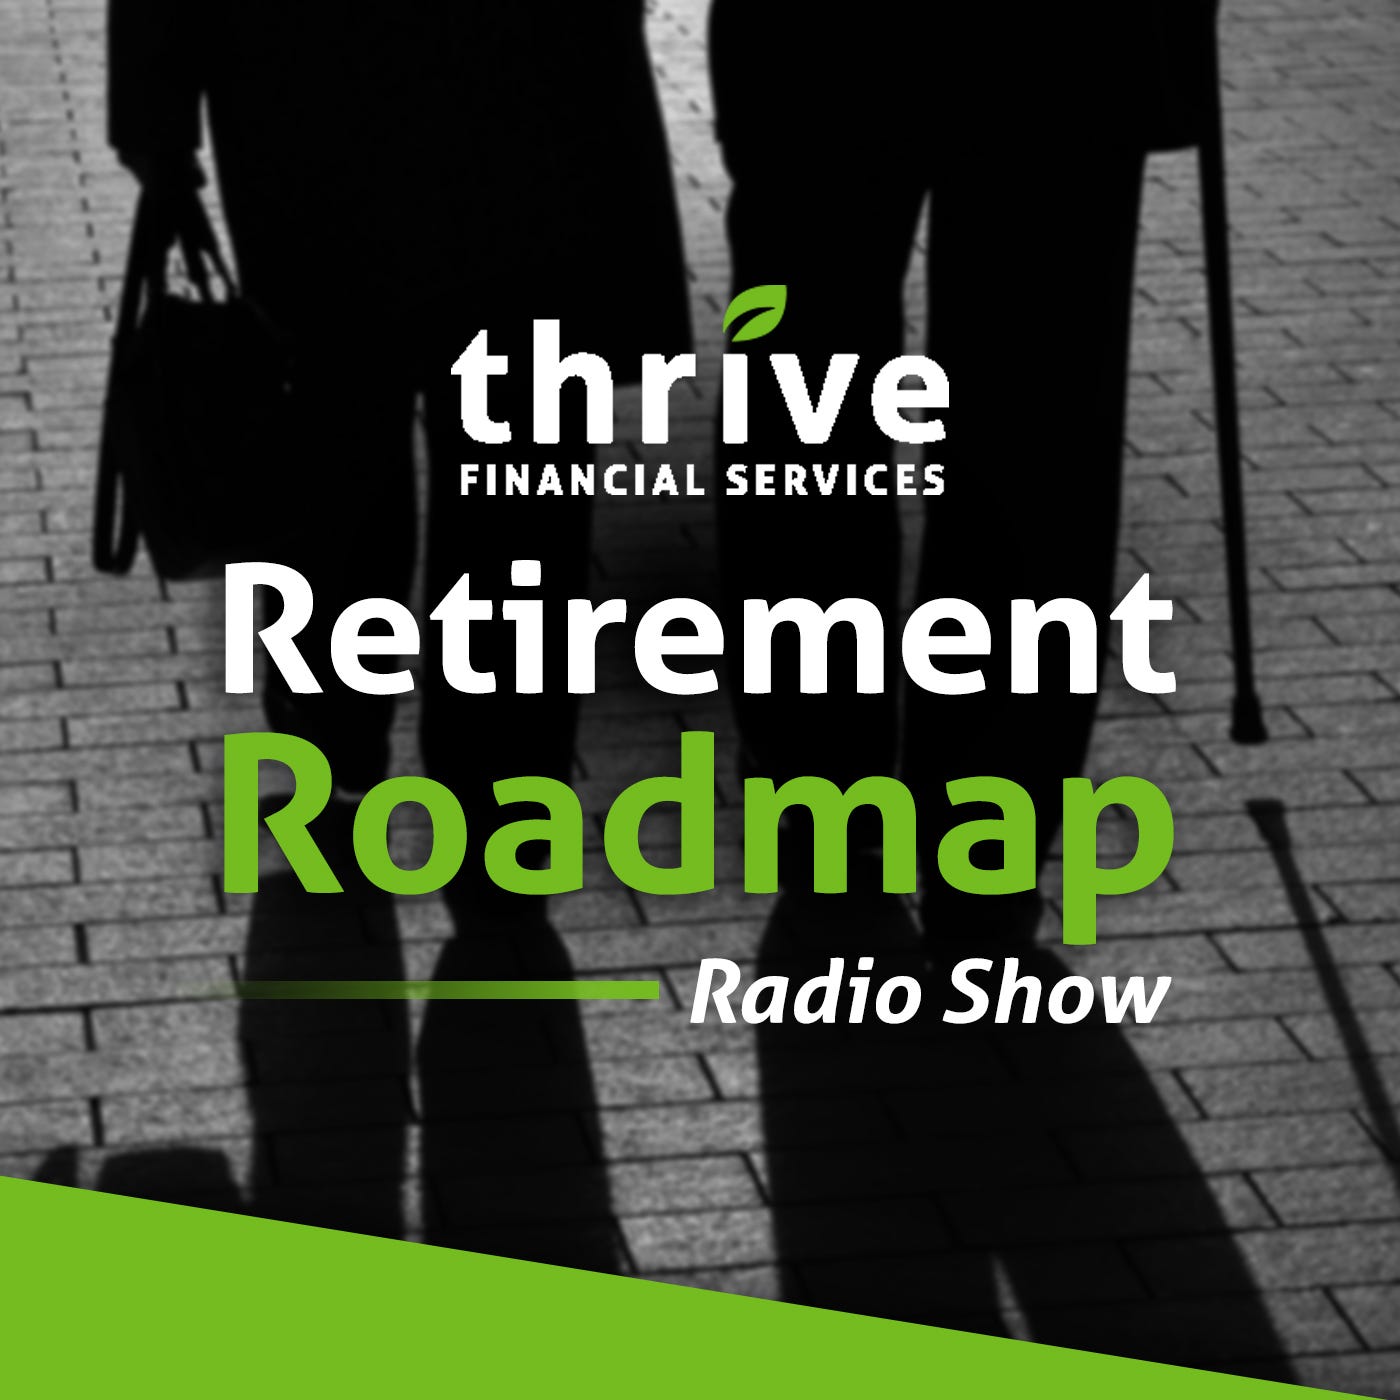 December 14, 2019 |Thrive Financial Services